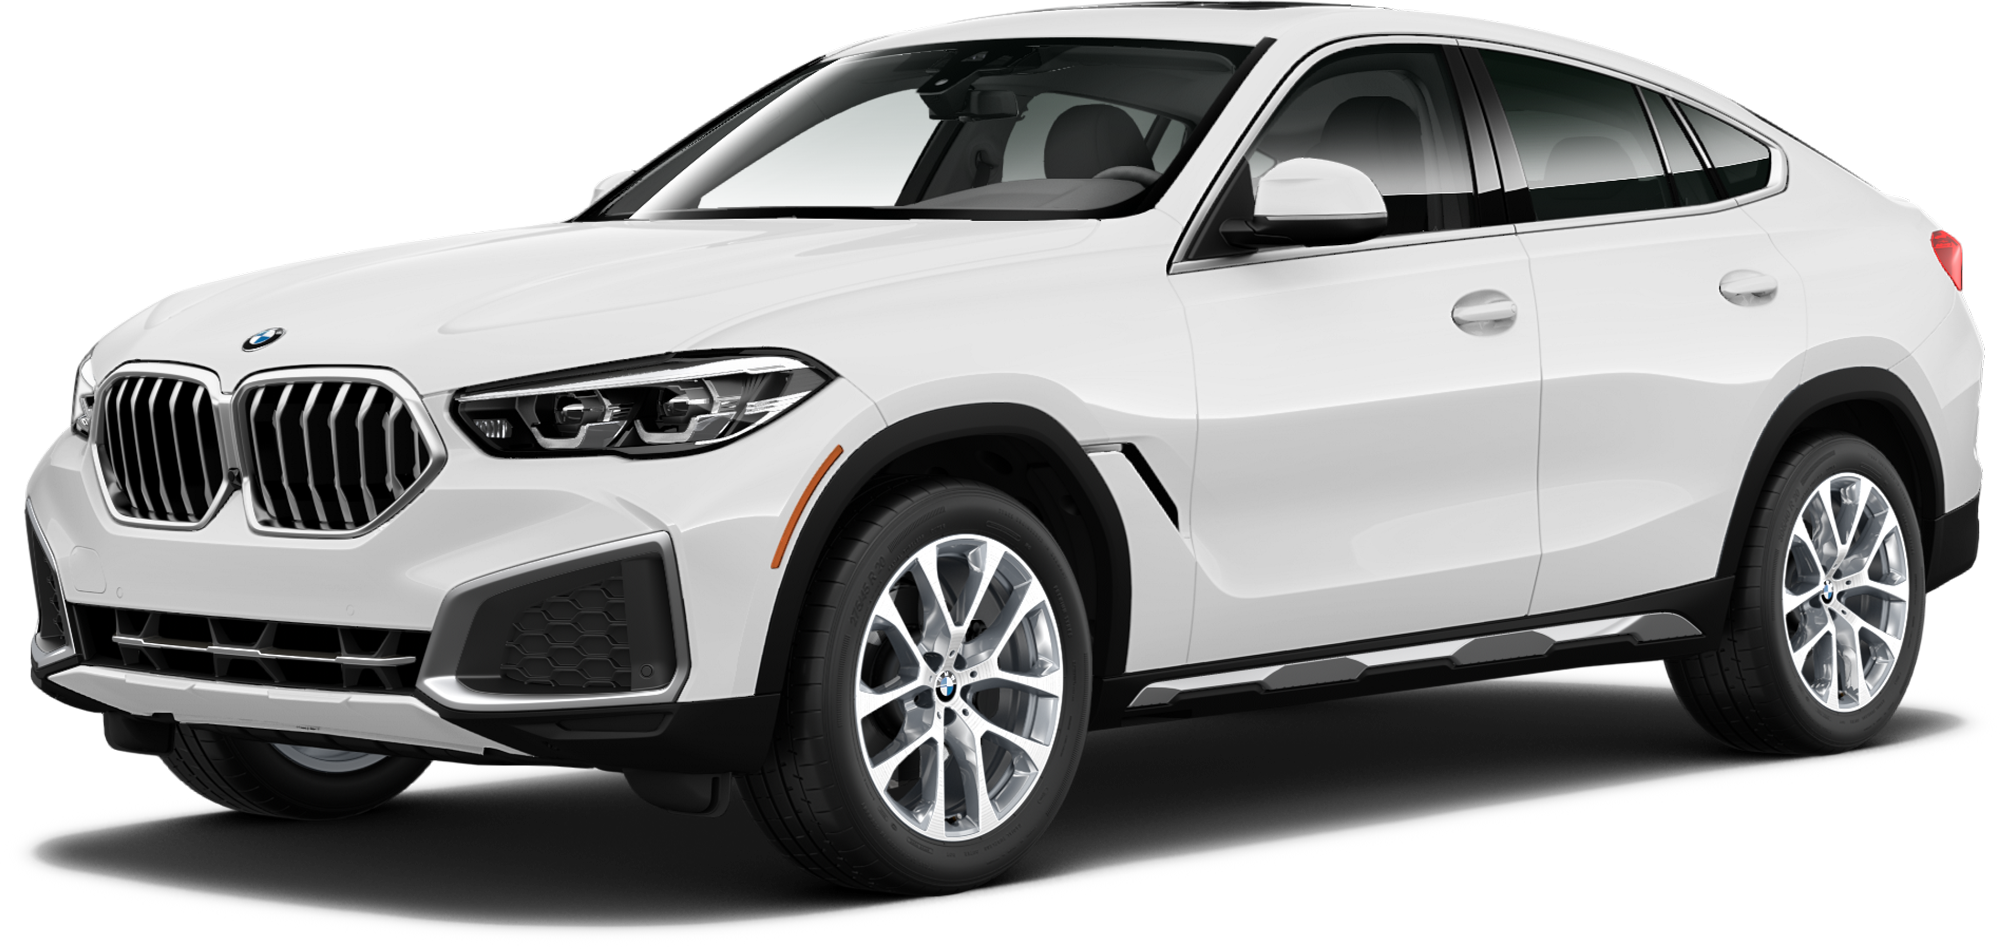 2022 BMW X6 Sports Activity Coupe